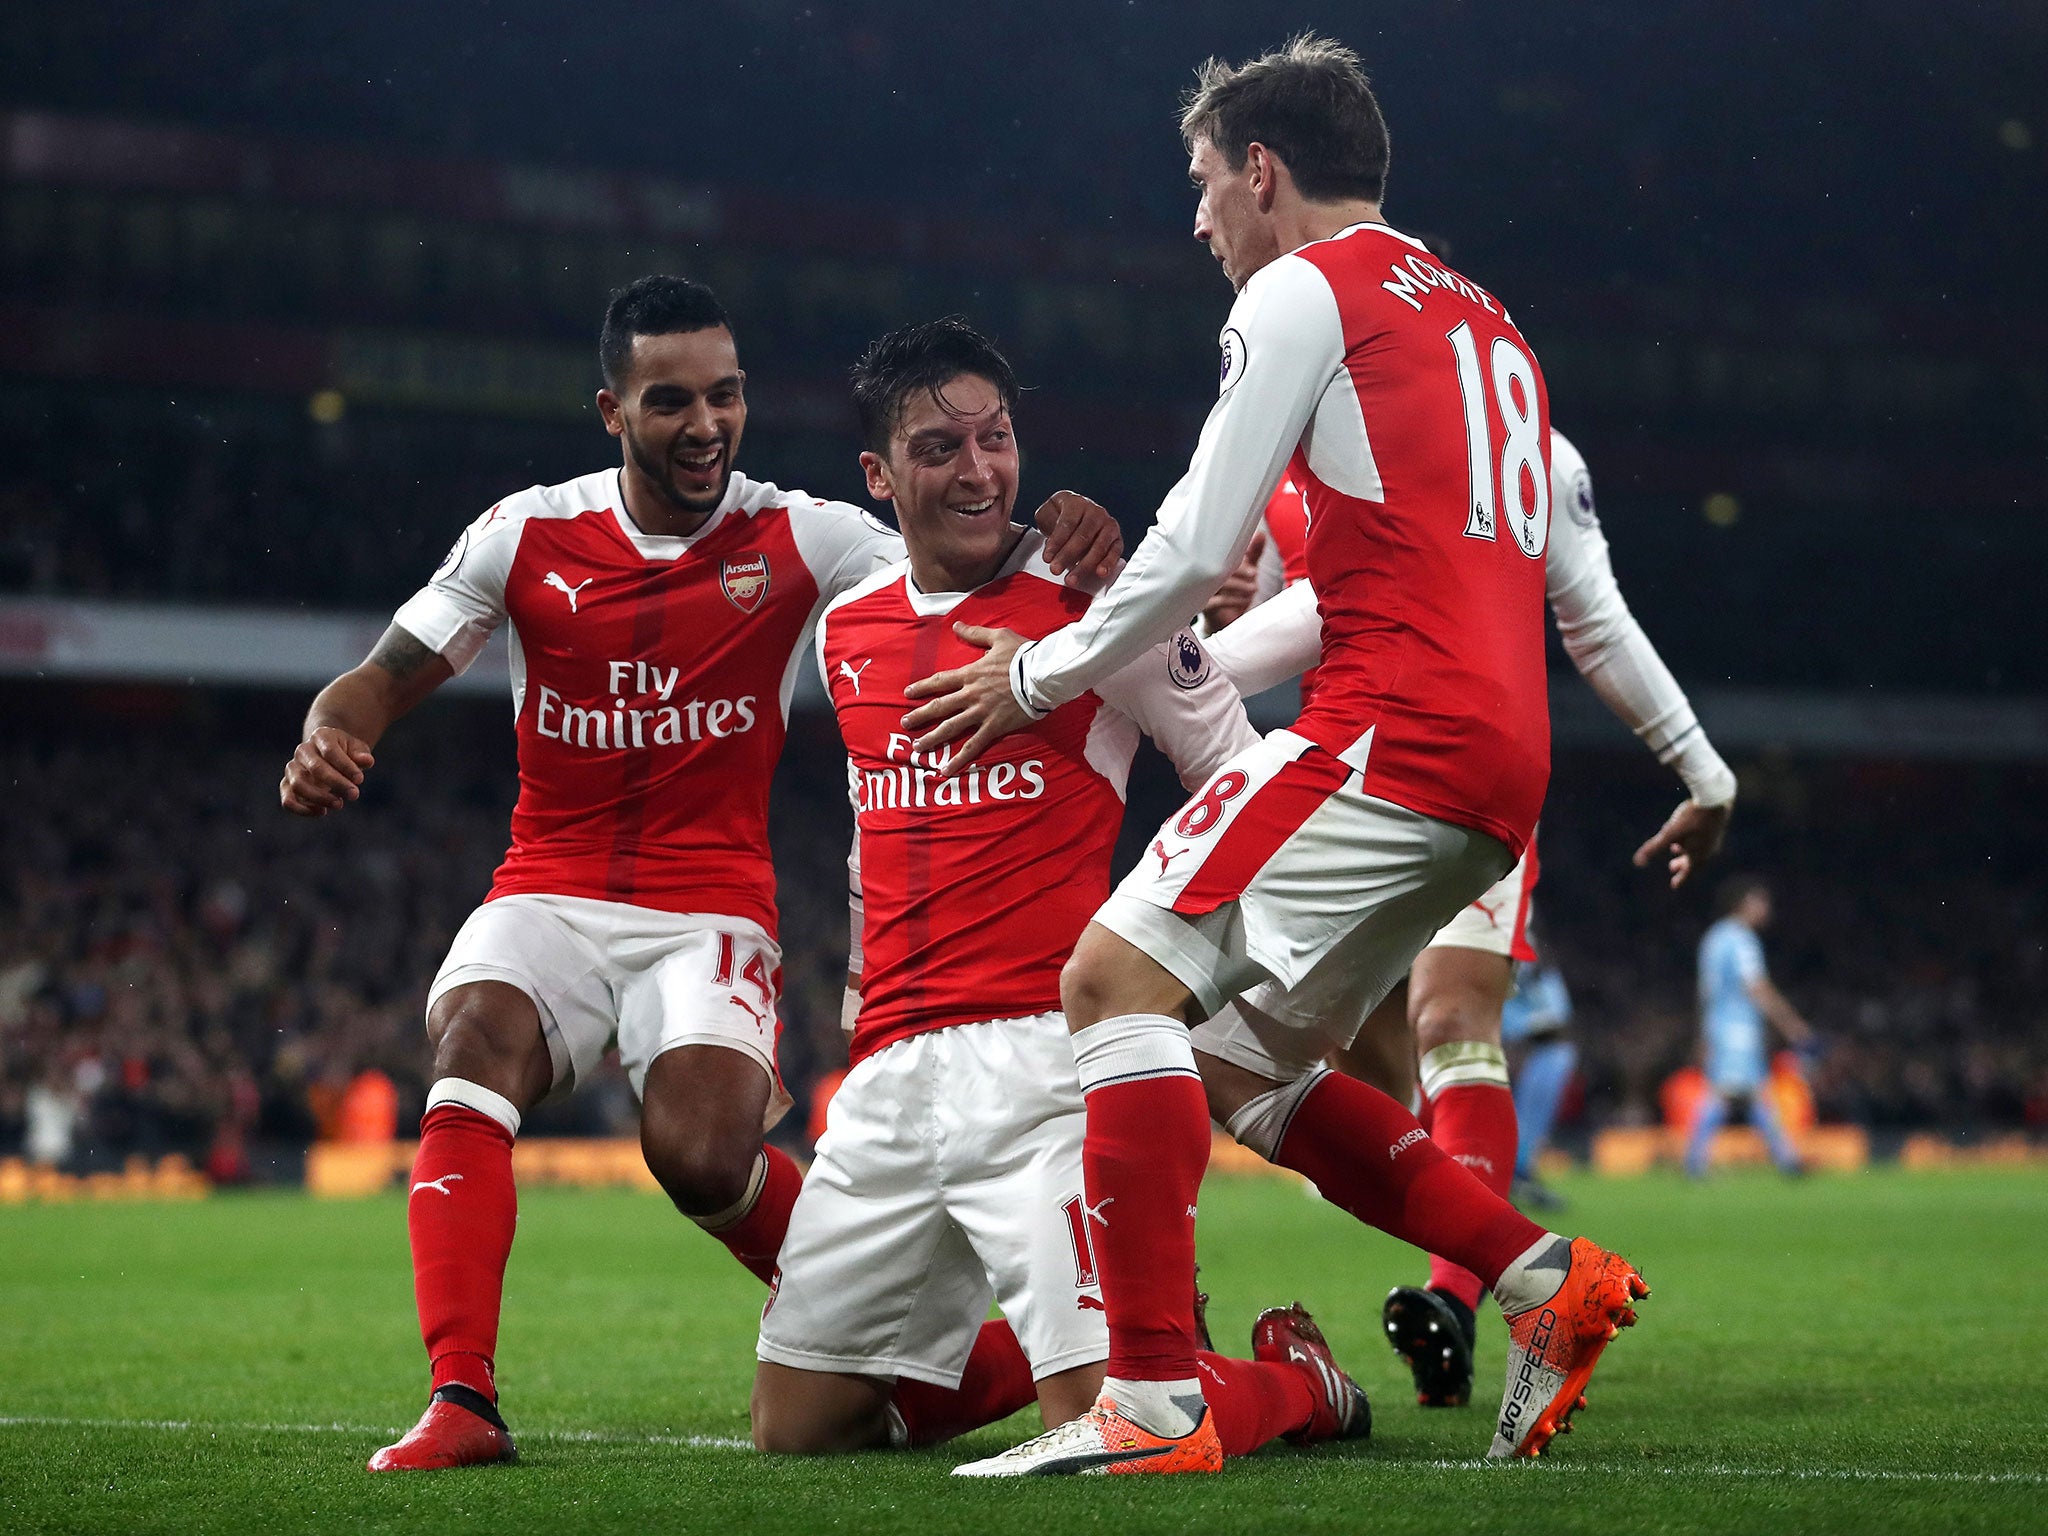 Arsenal's impressive form in the Champions League has been rewarded with a last-16 tie against Bayern Munich